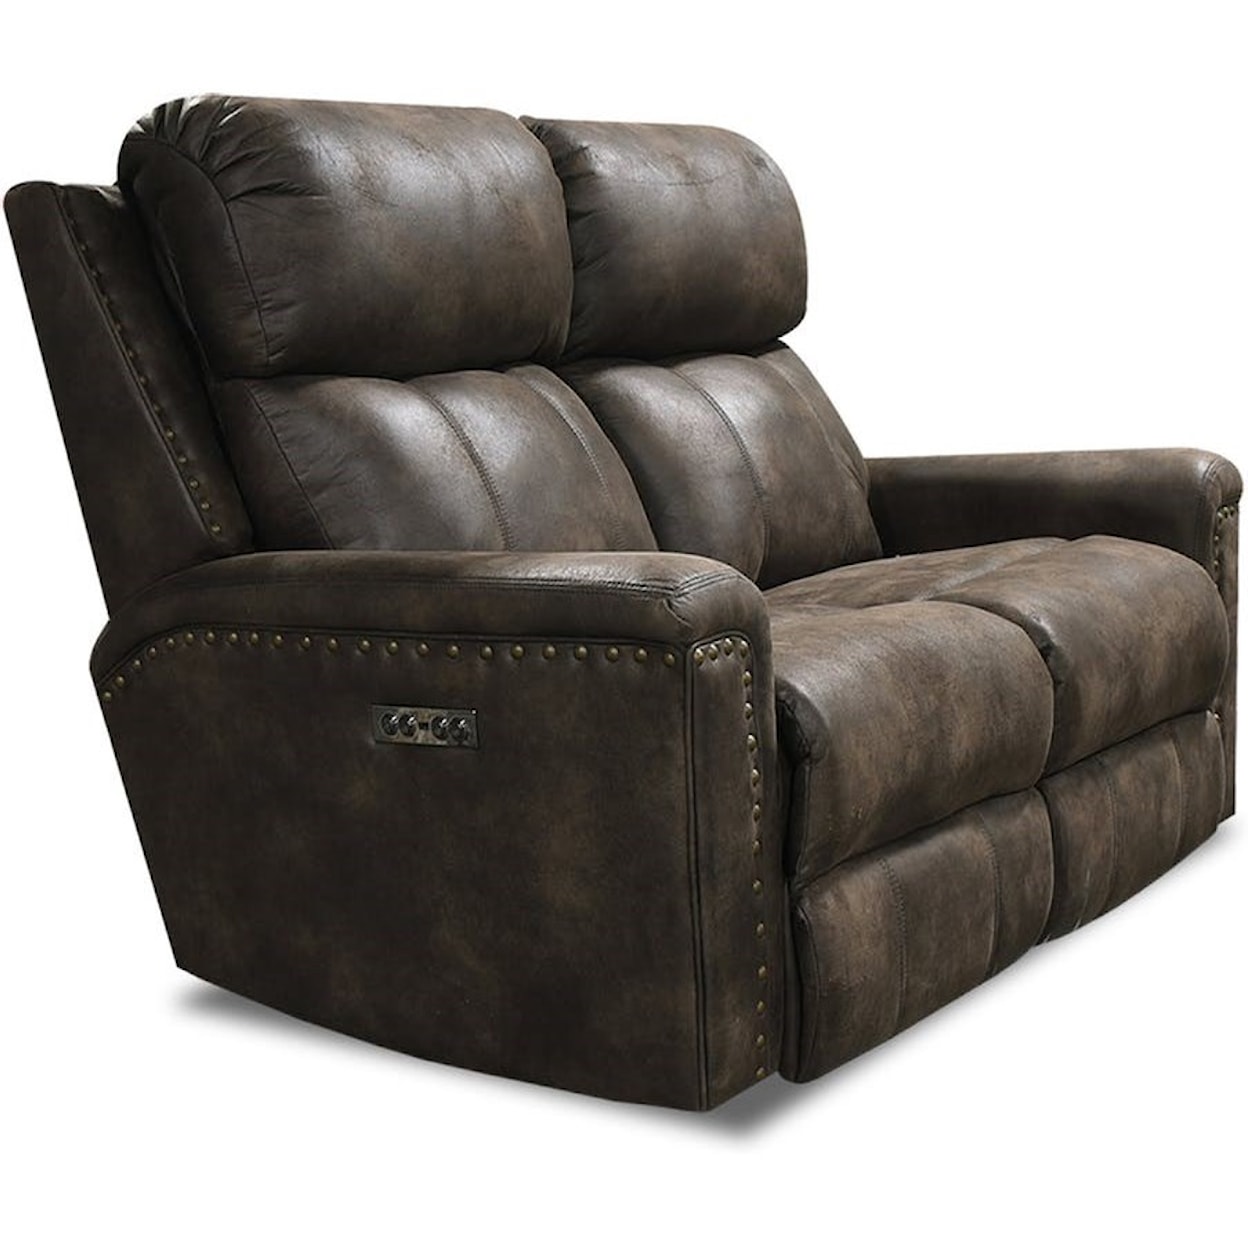 England EZ1C00/H/N Series Power Double Reclining Loveseat w/ Nails